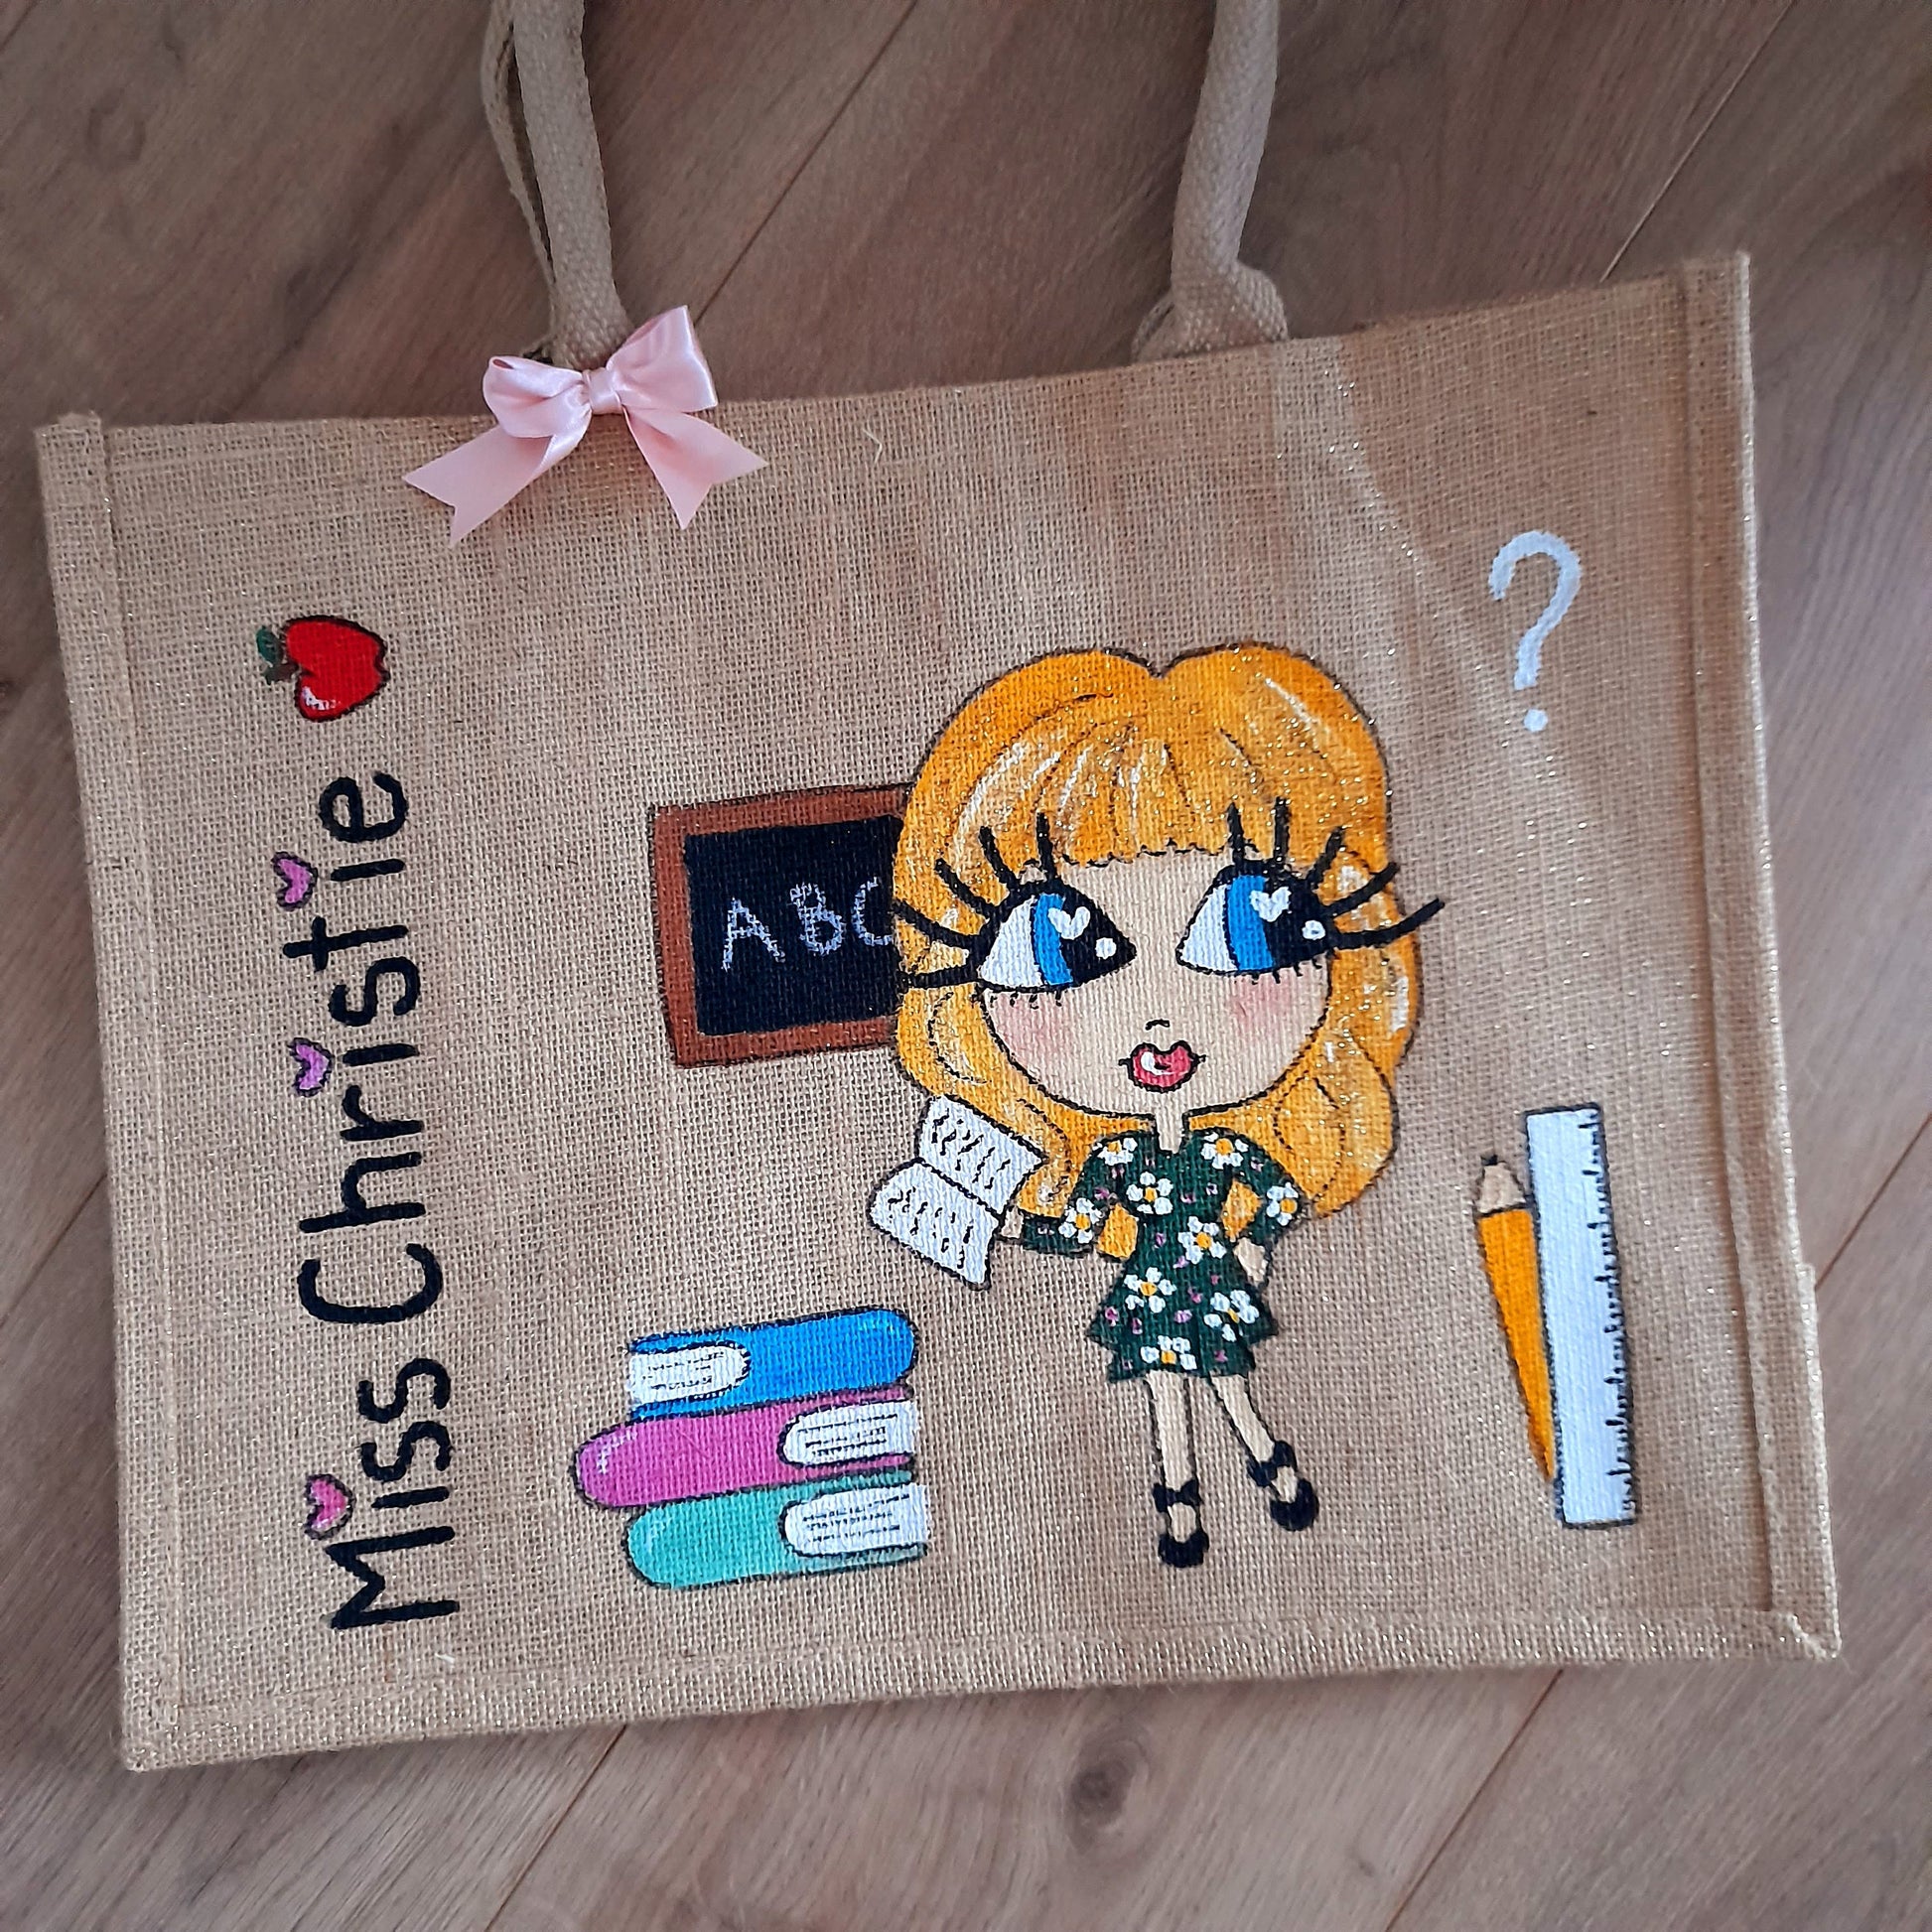 Hand painted jute tote bag for teacher